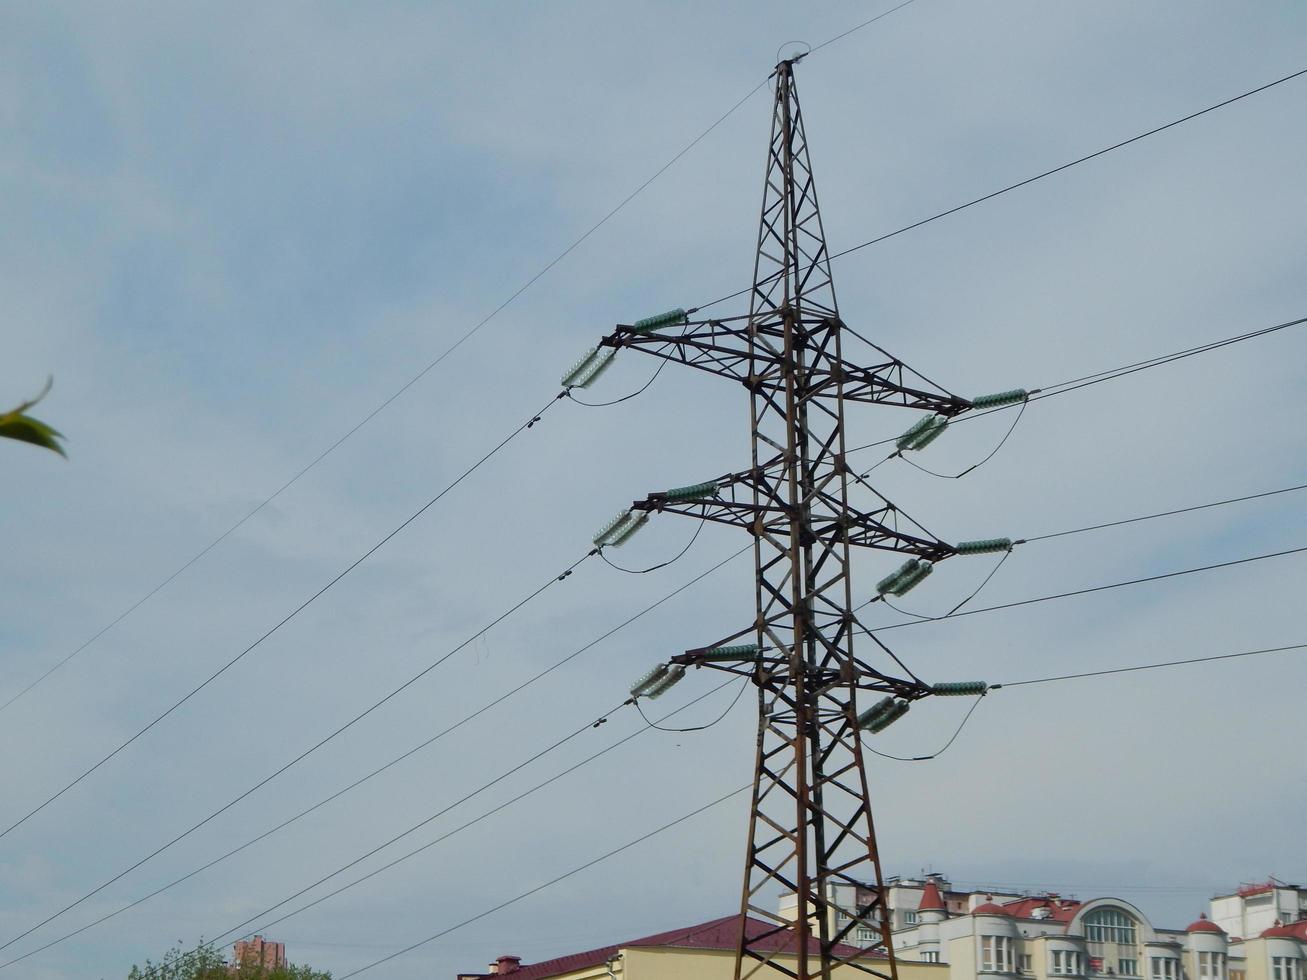 Power lines in the city, strained wires on a metal structure photo